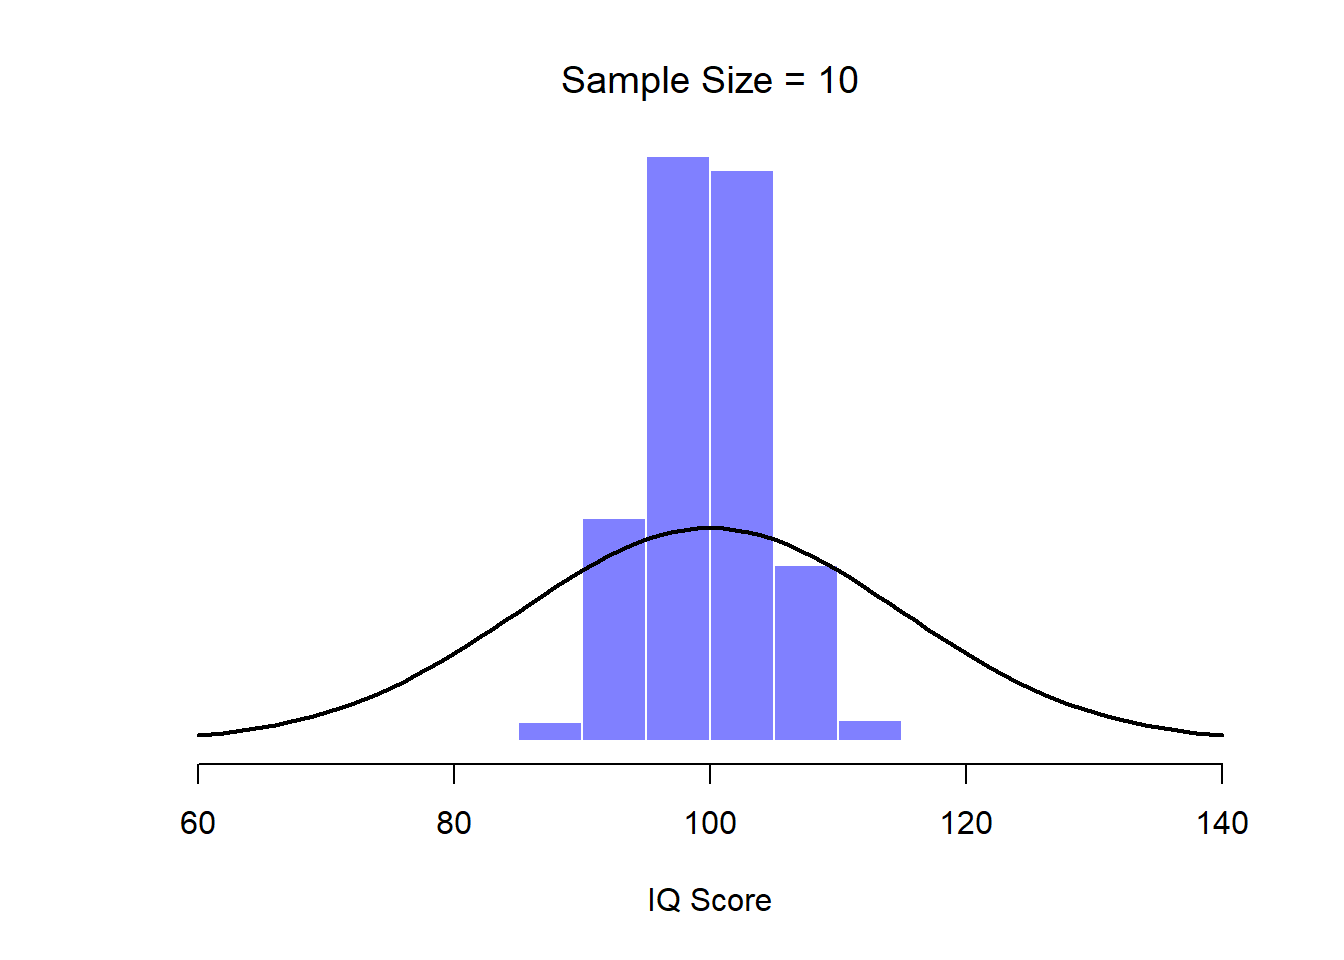 By the time we raise the sample size to 10, we can see that the distribution of sample means tend to be fairly tightly clustered around the true population mean.